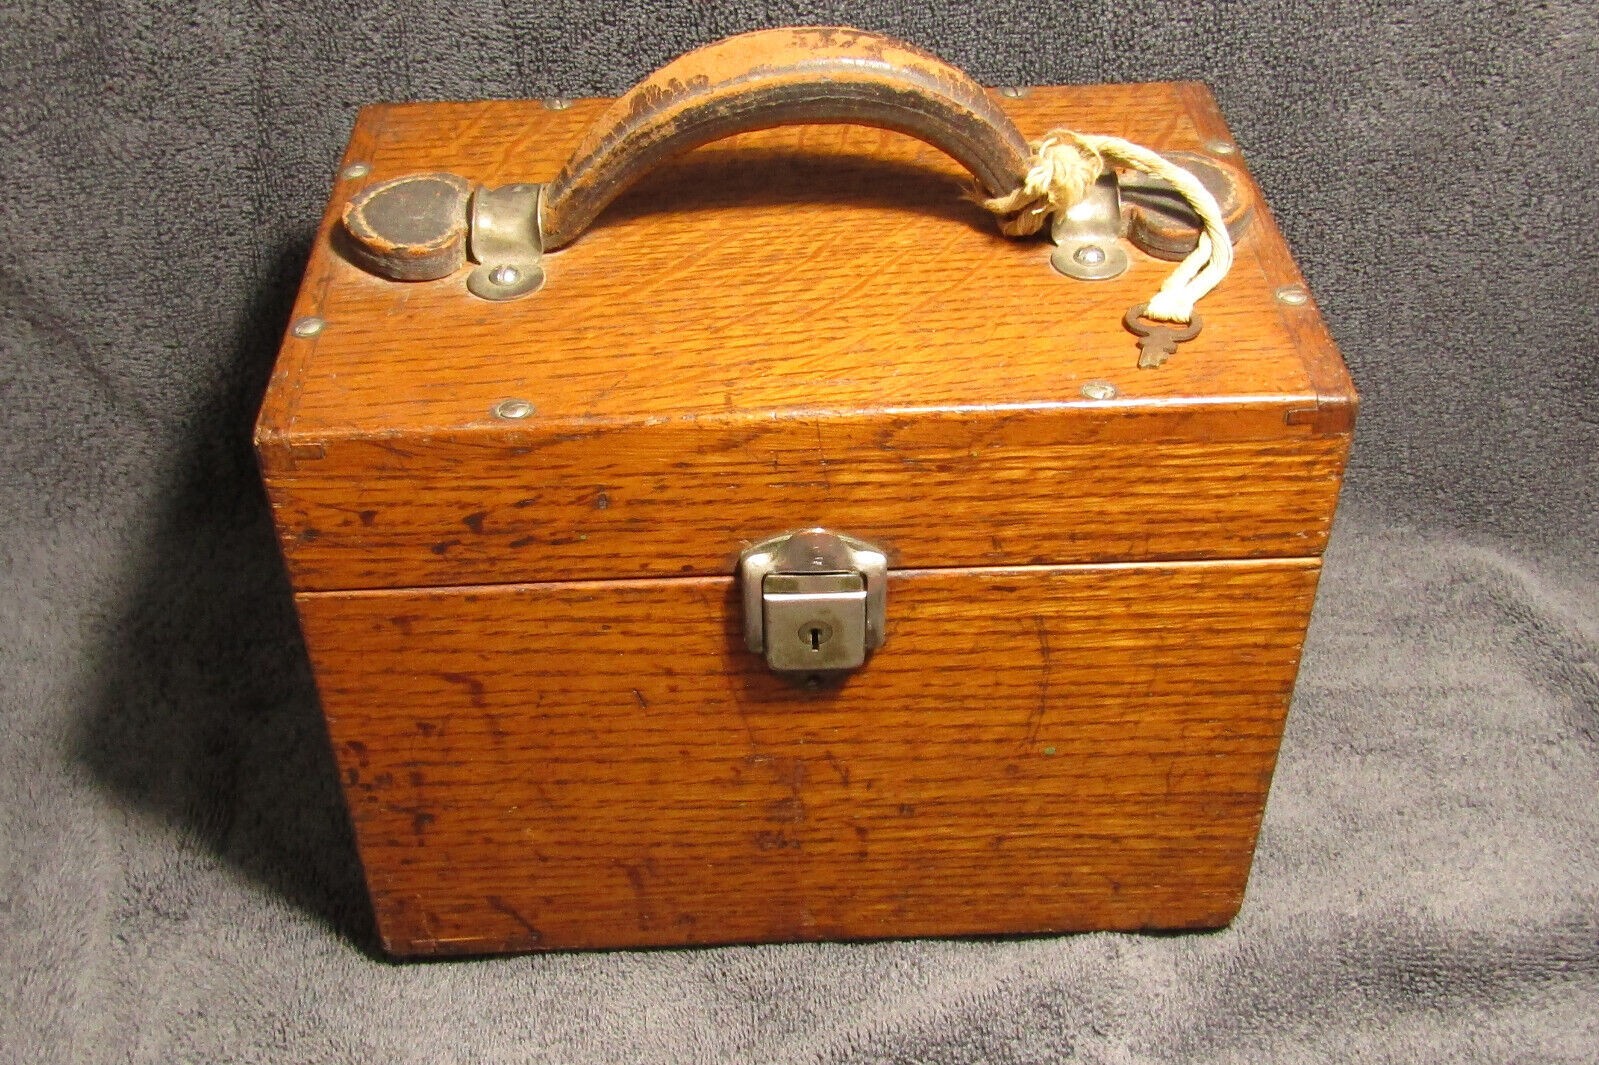 SOLID OLD WOODEN INSTRUMENT BOX locking with key & sturdy Leather Handle